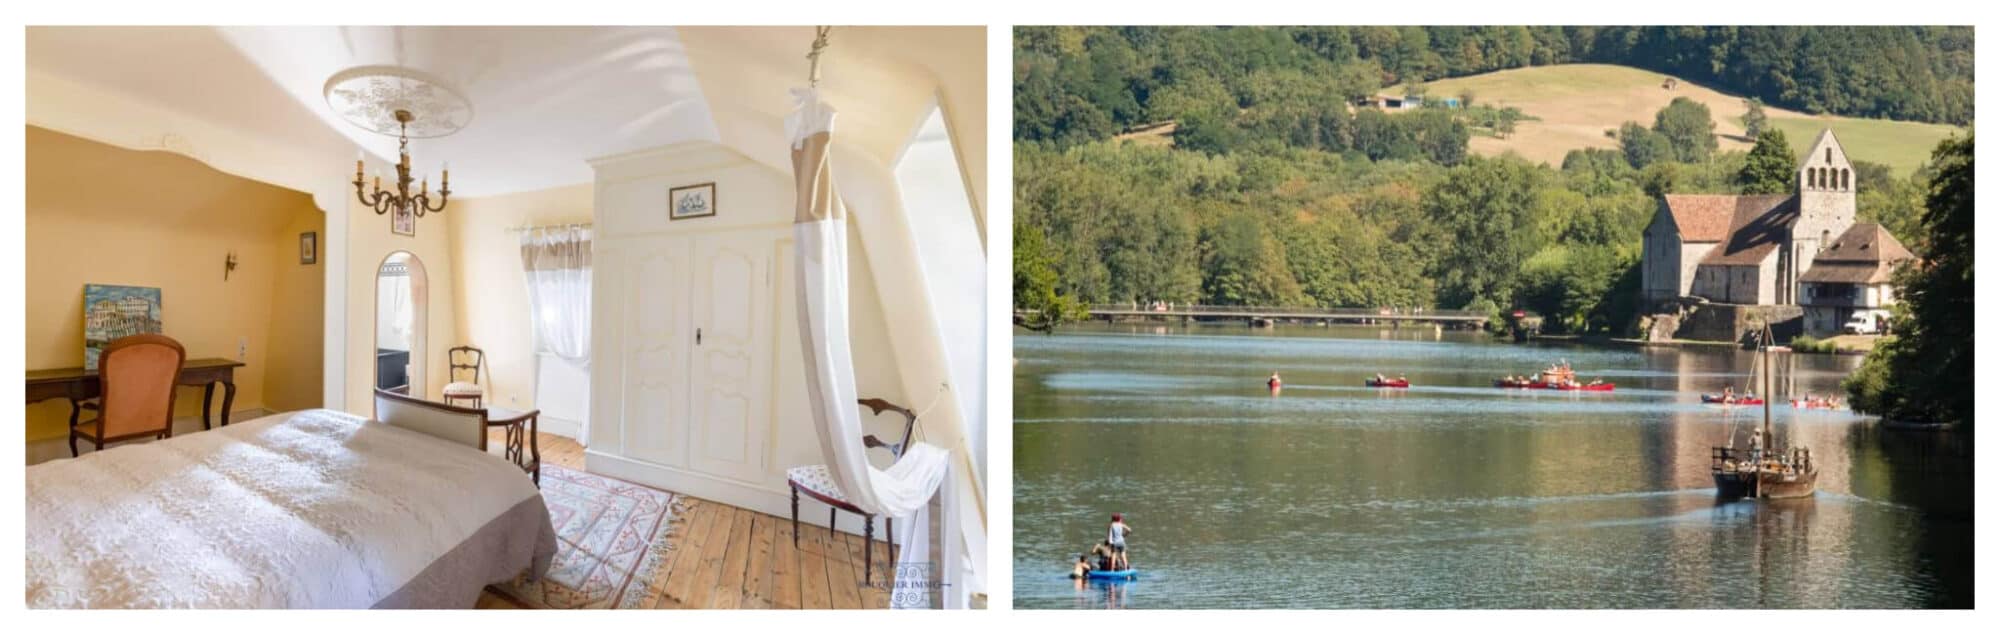 Left: A bedroom in a house in Dordogne, France, that has a wooden flooring and white curtains; Right: Dordogne, France's river with a castle beside it and people on boats.